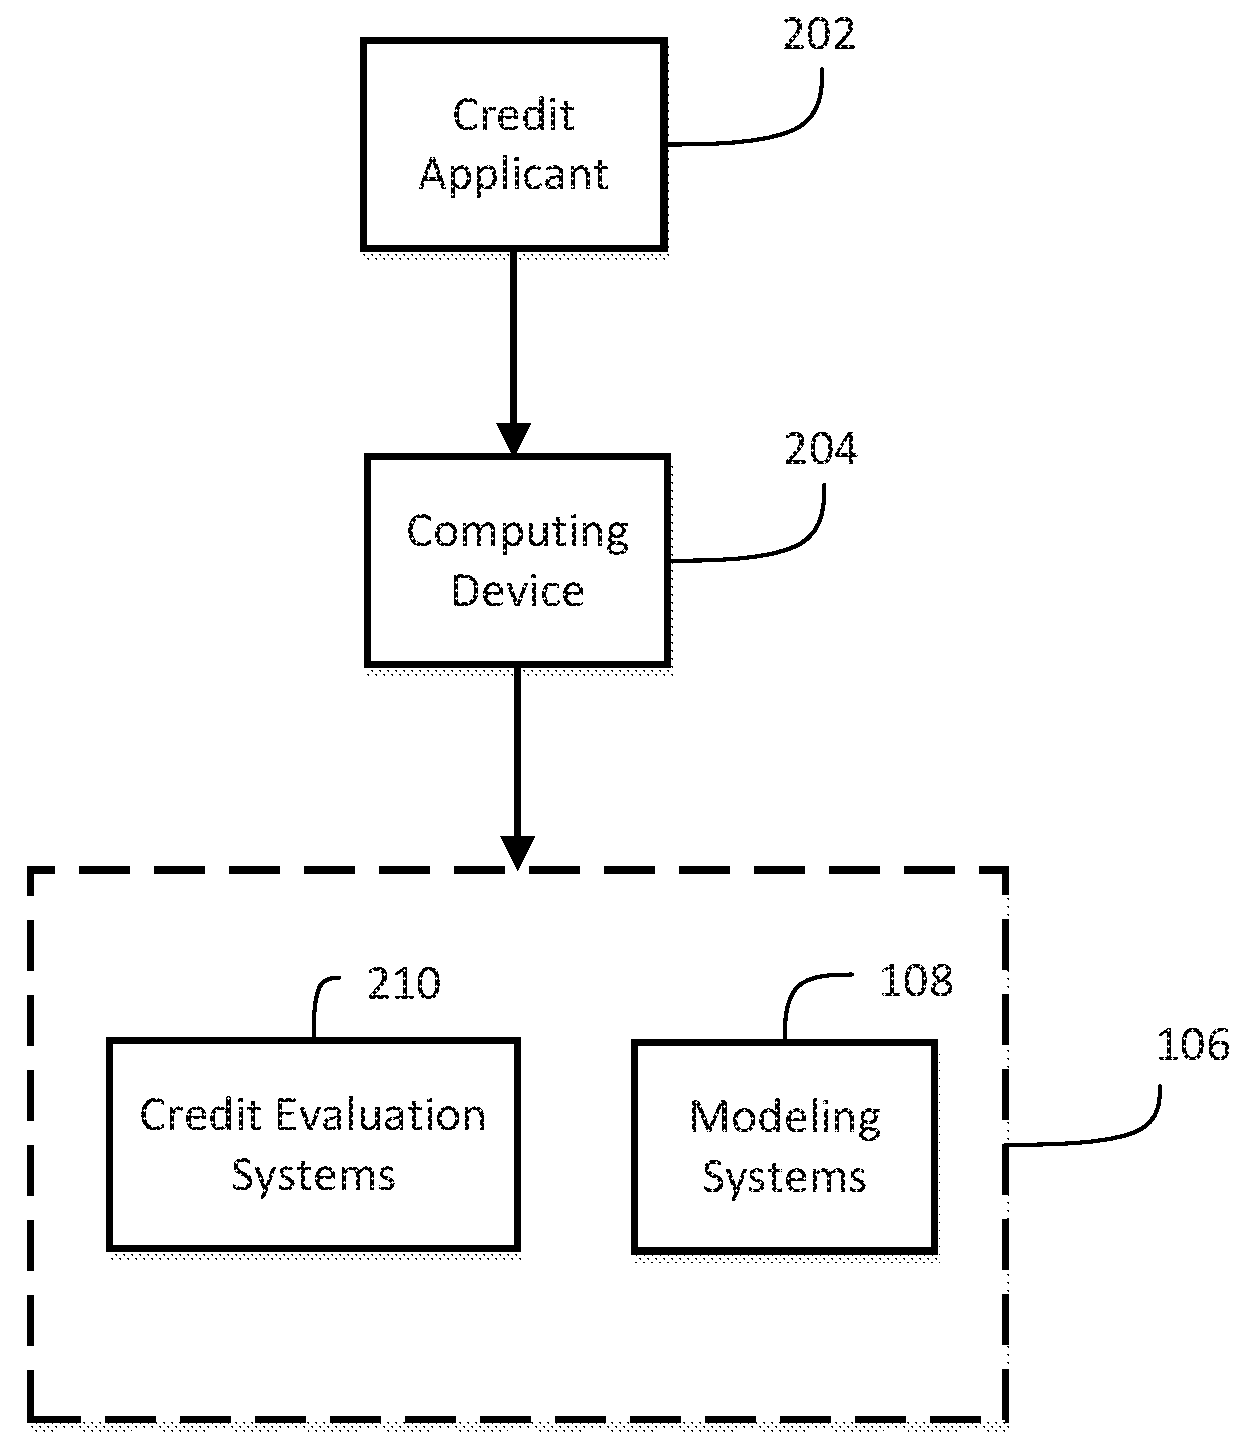 Systems and methods for custom ranking objectives for machine learning models applicable to fraud and credit risk assessments